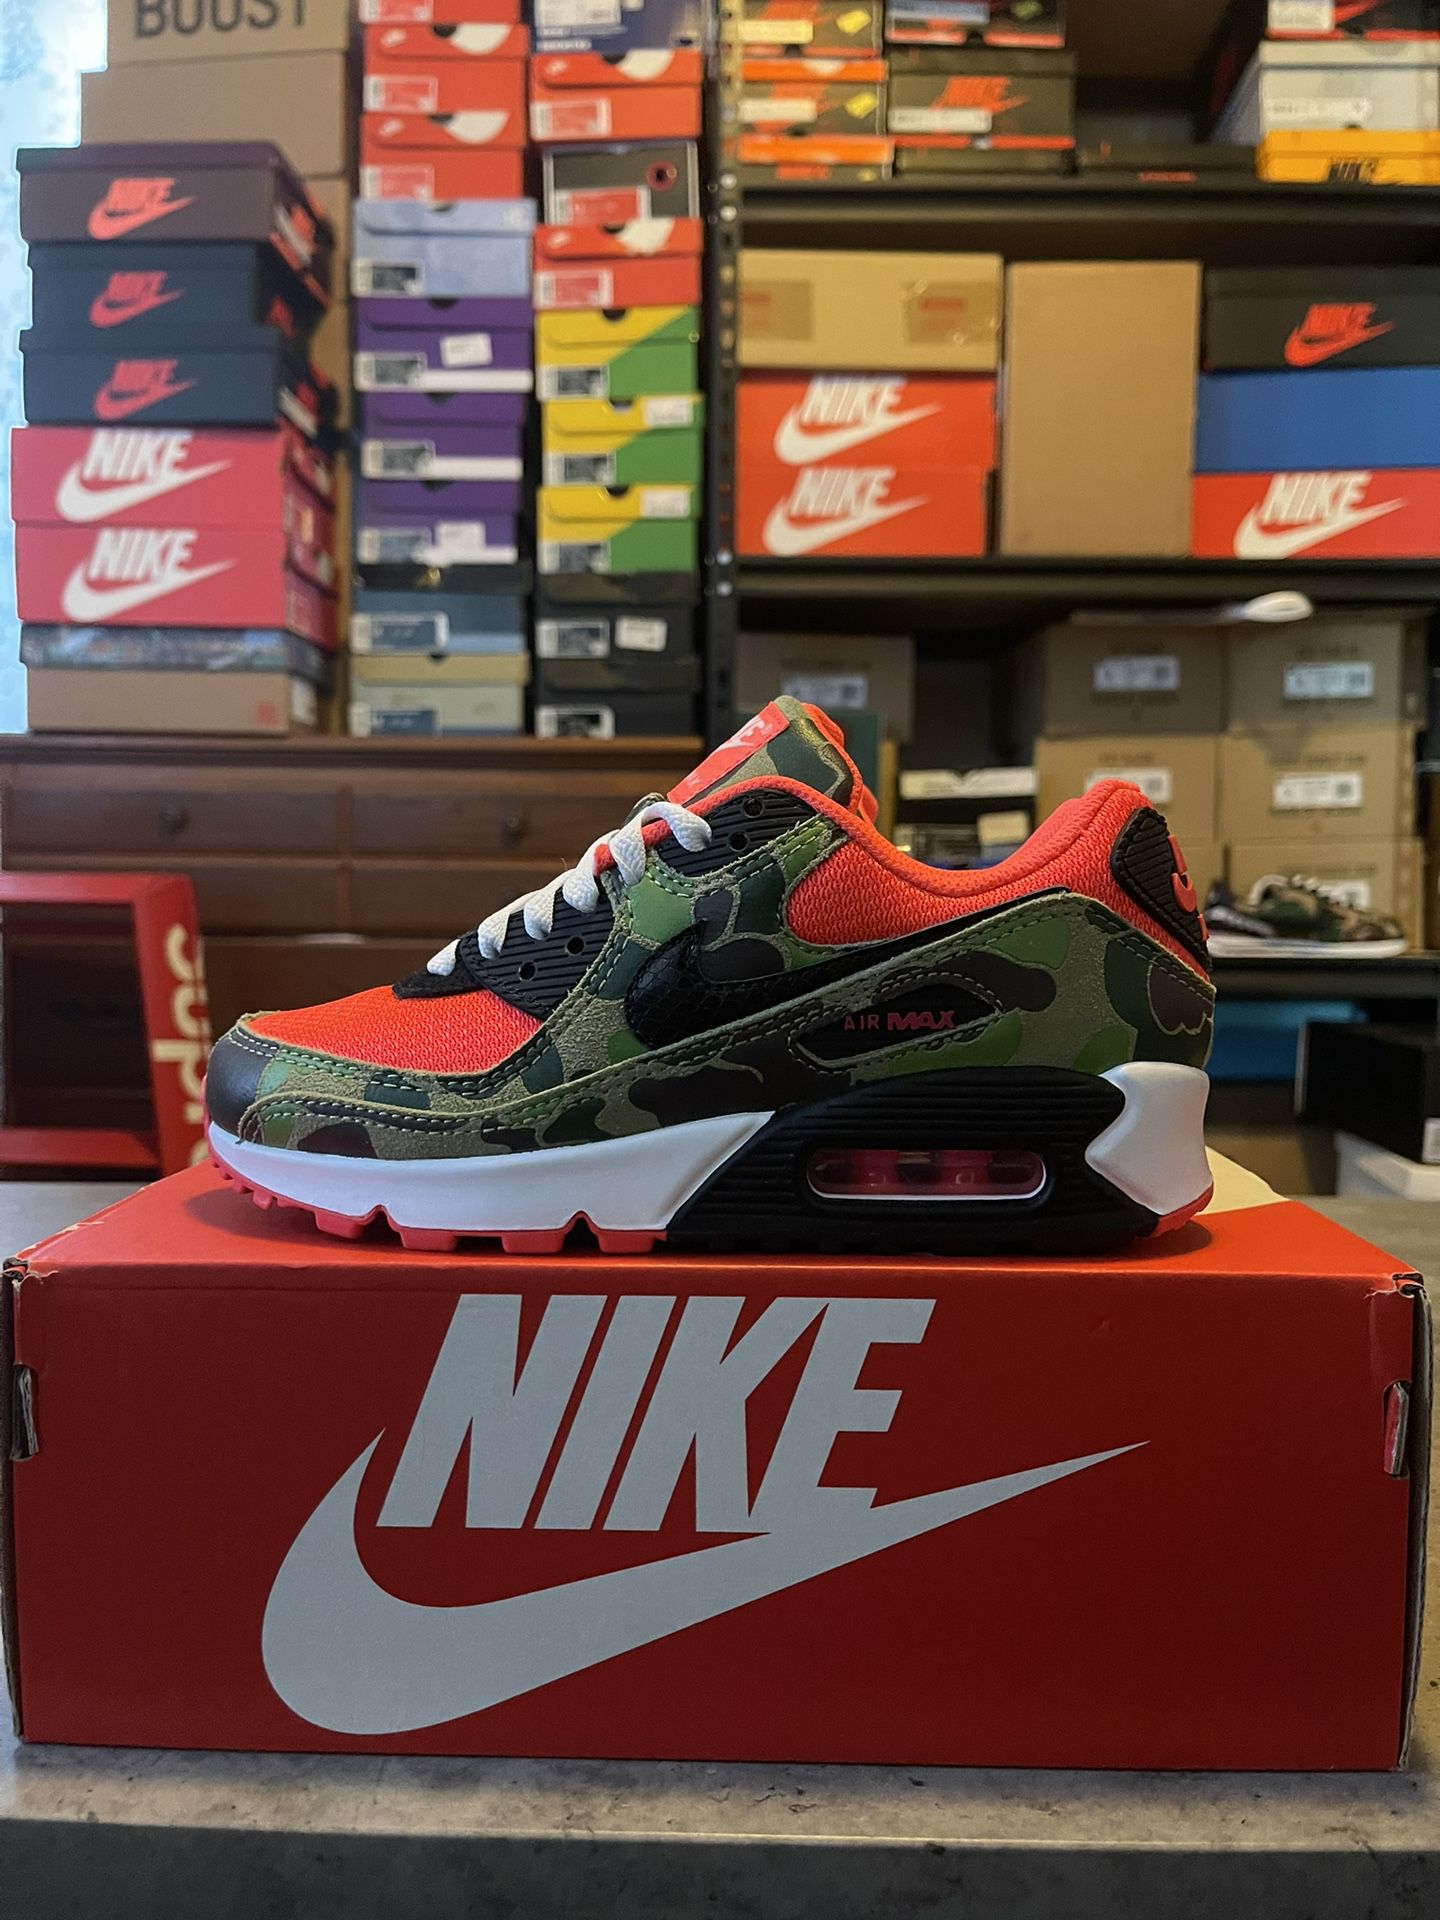 NIKE AIR MAX 90 REVERSE DUCK CAMO (2020) for Sale in Carson, CA - OfferUp